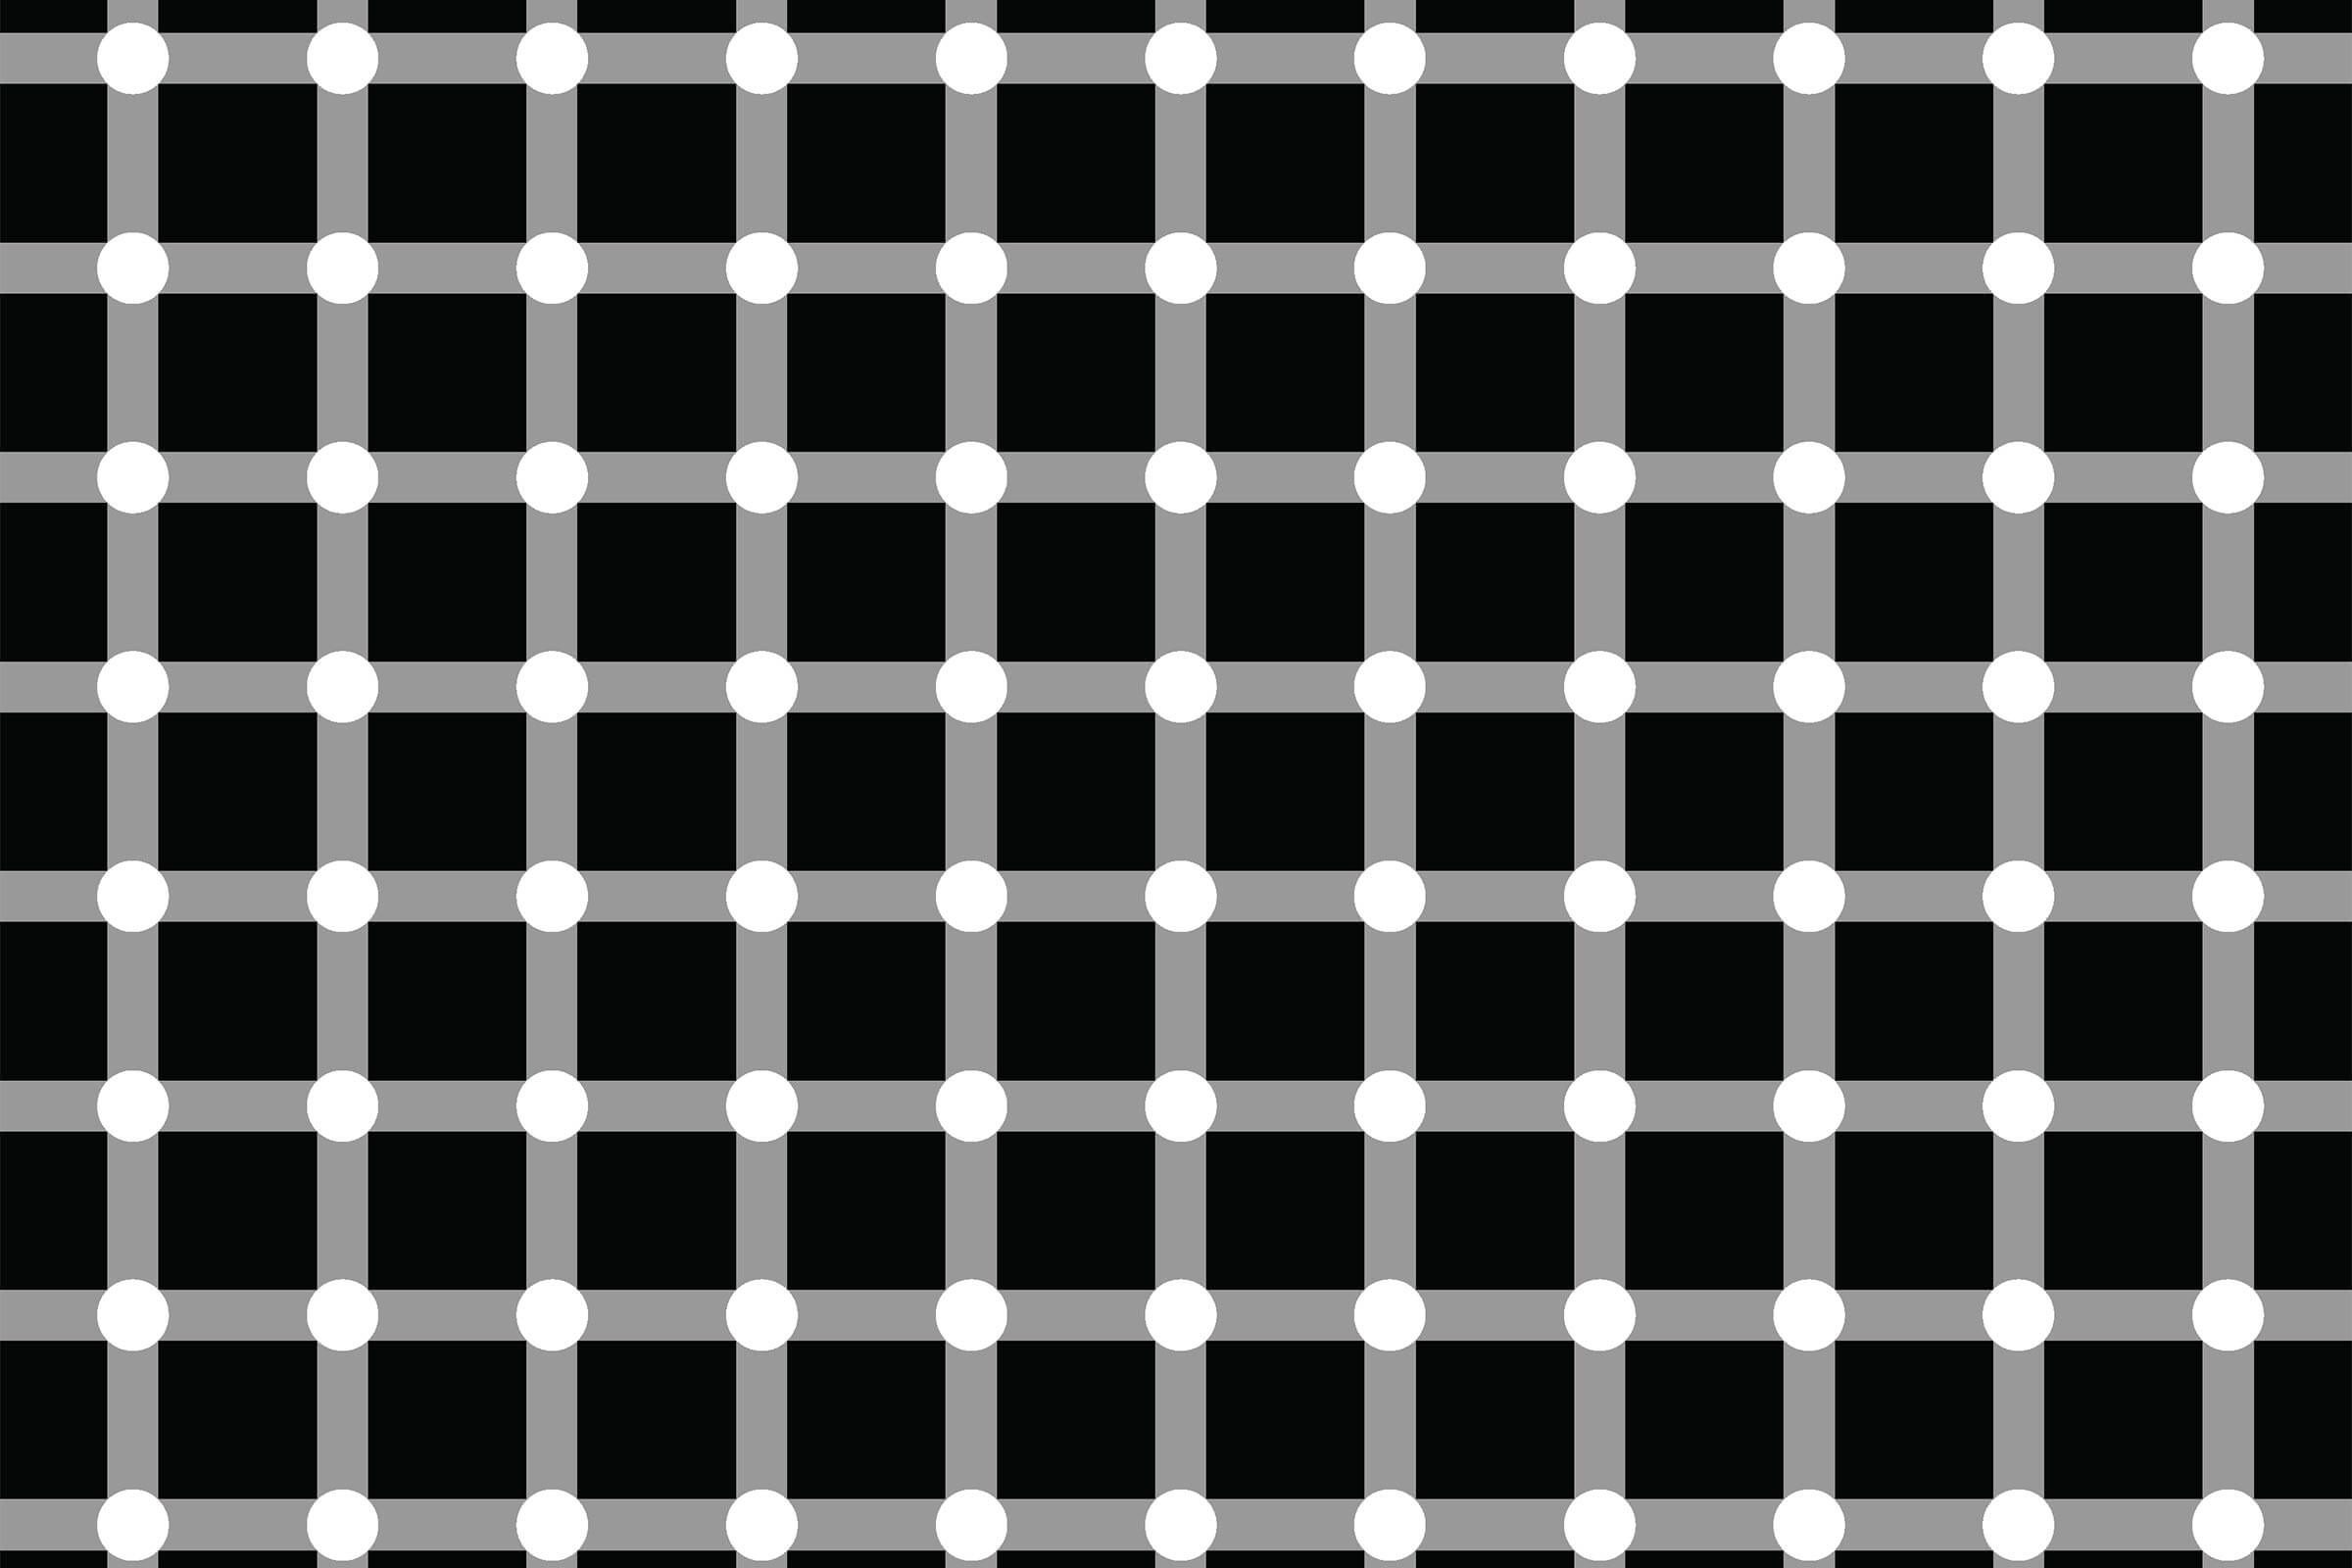 Everyone sees this optical illusion differently. Does the outline